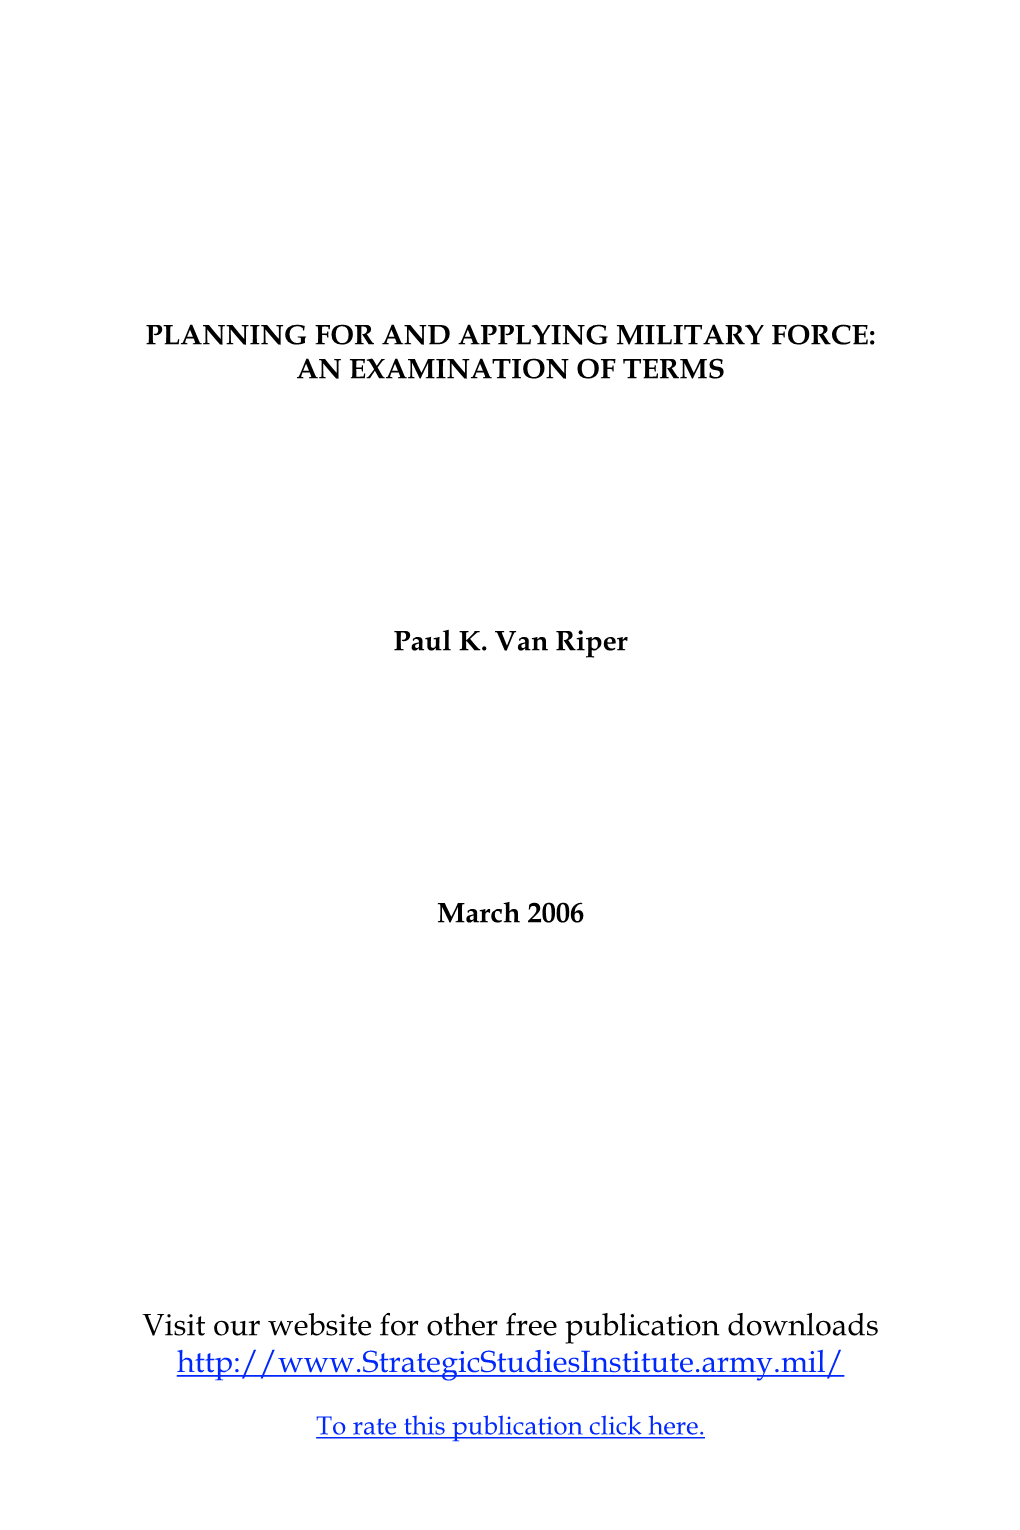 Planning for and Applying Military Force: an Examination of Terms